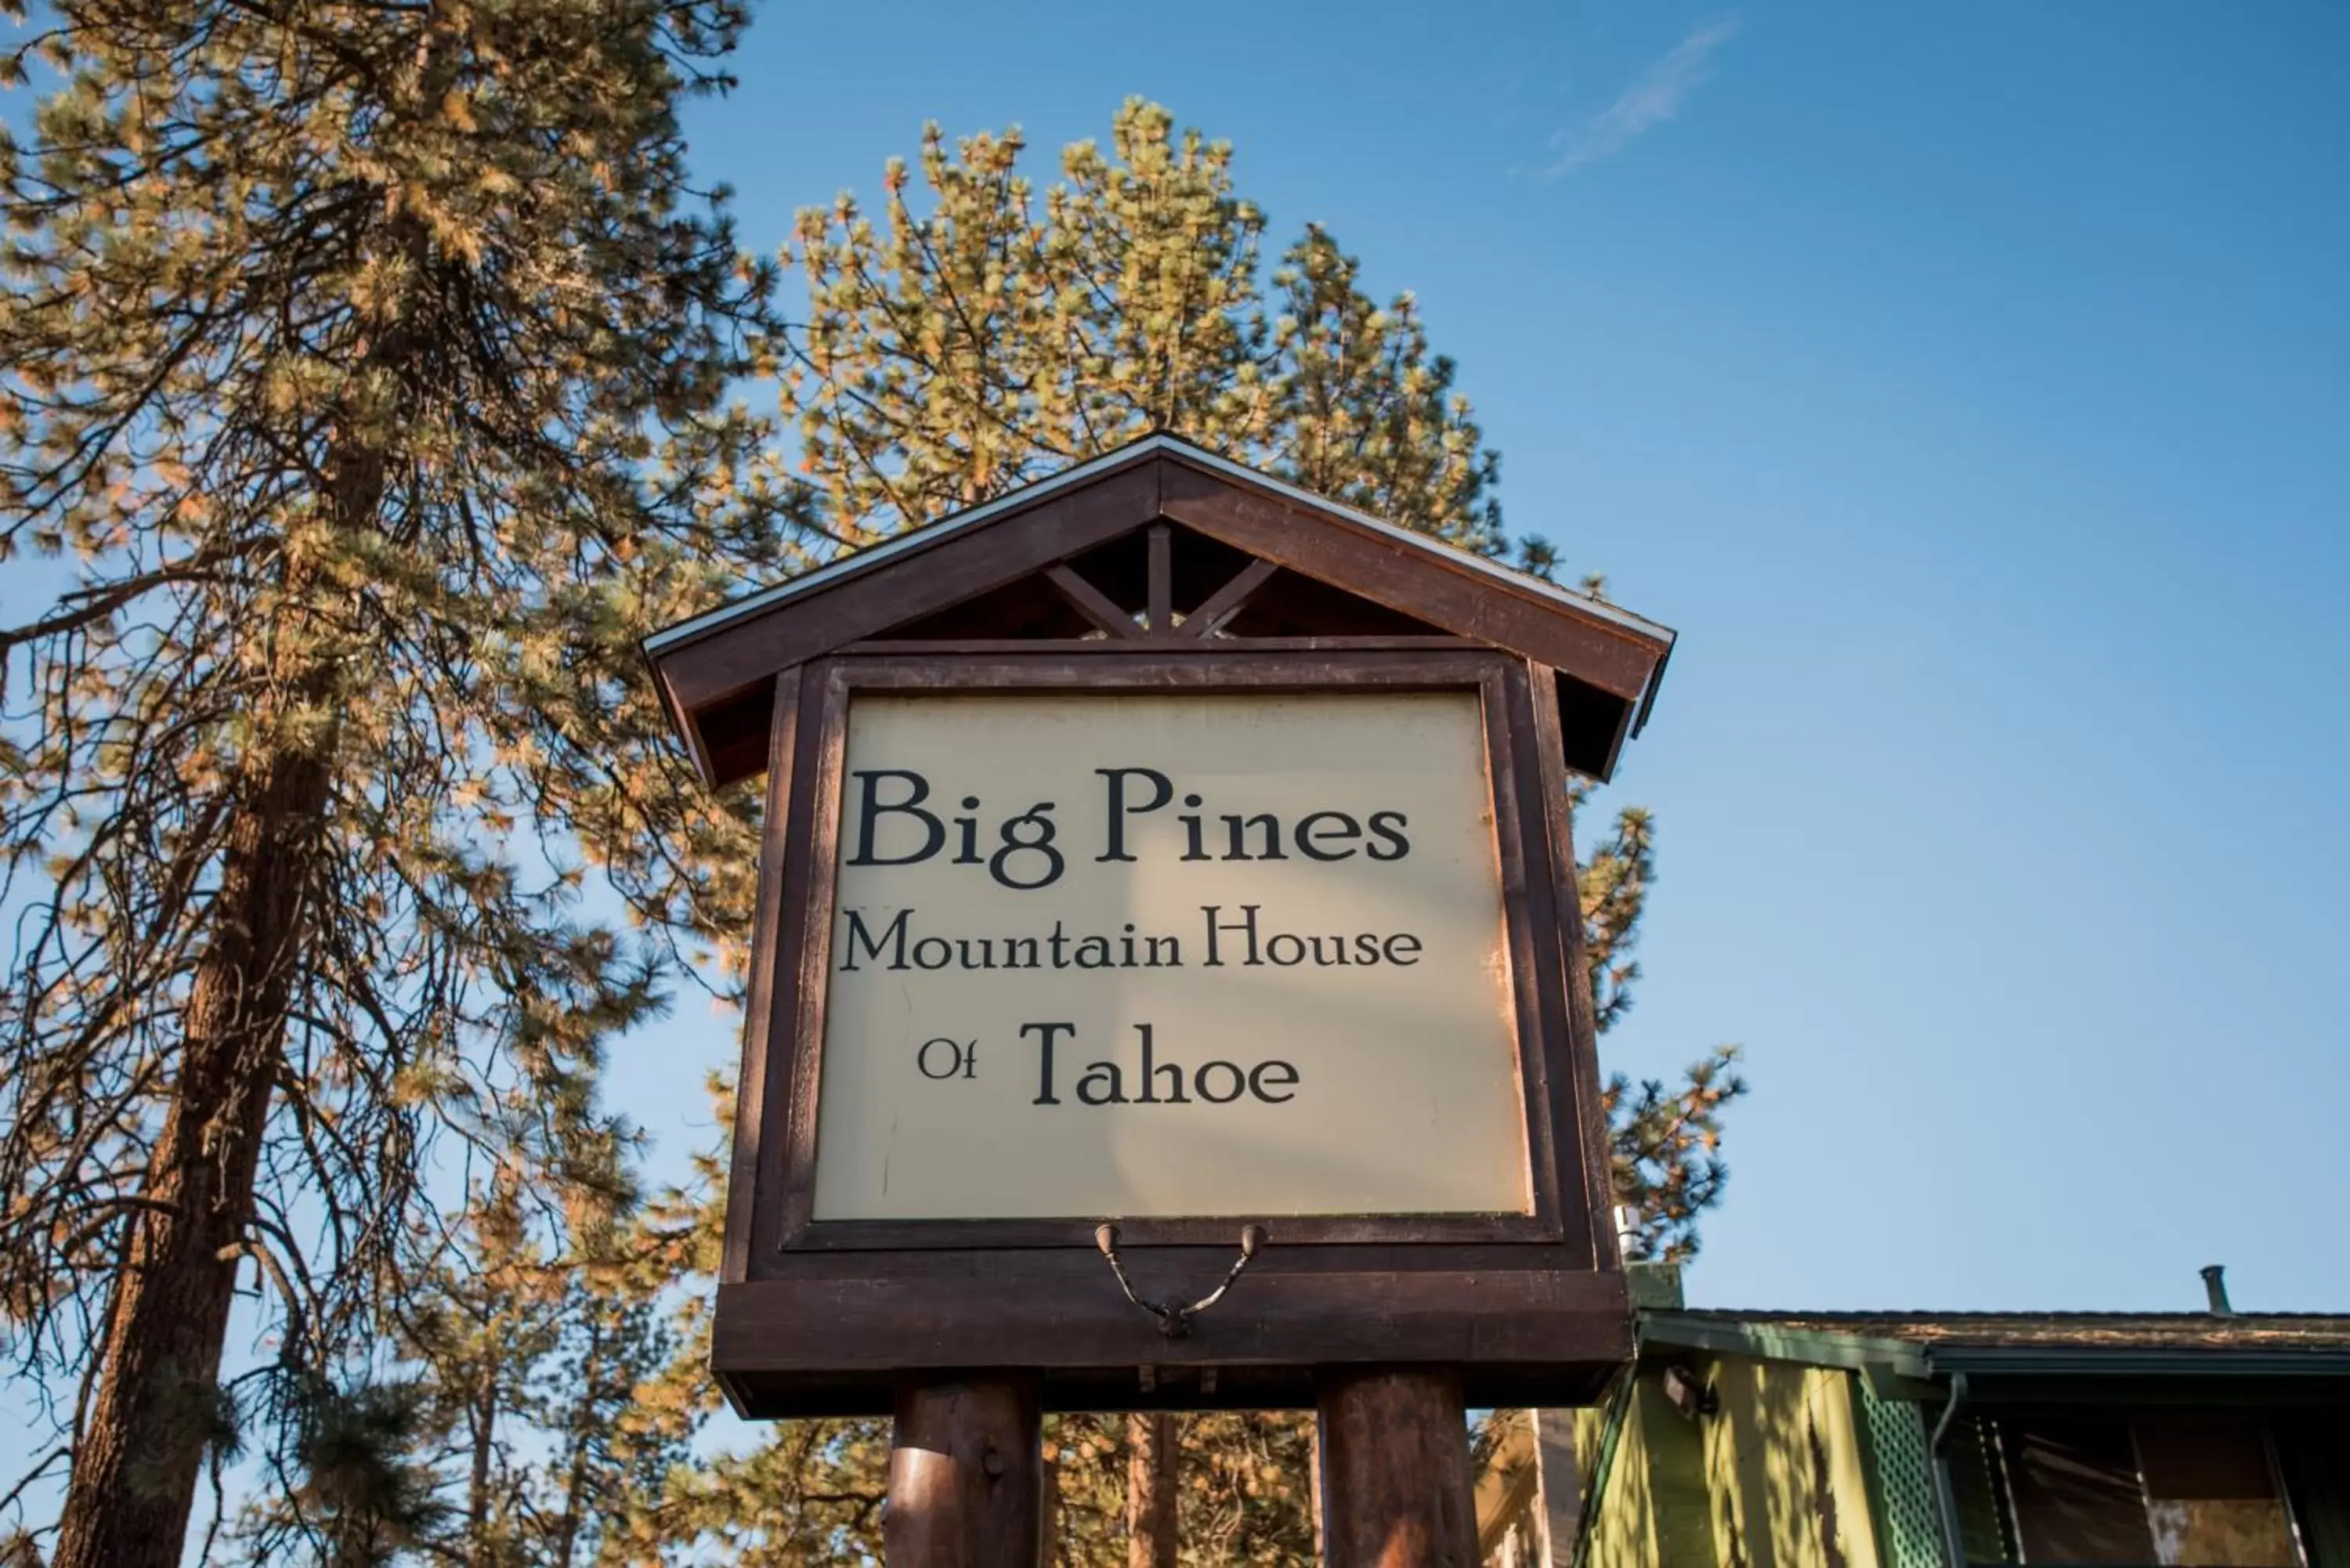 Property logo or sign in Big Pines Mountain House